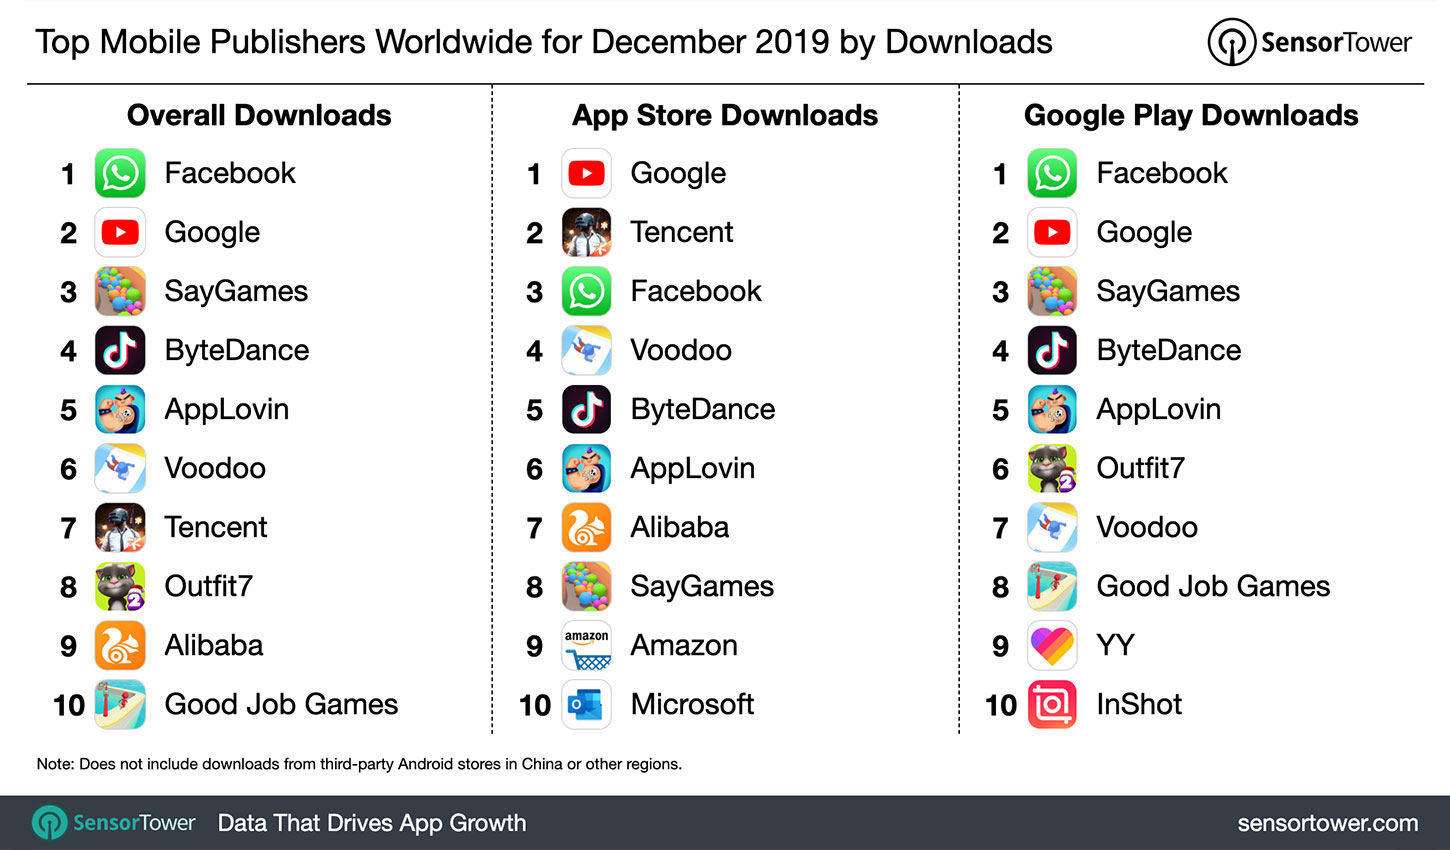 Top Mobile Publishers Worldwide for December 2019 by Downloads